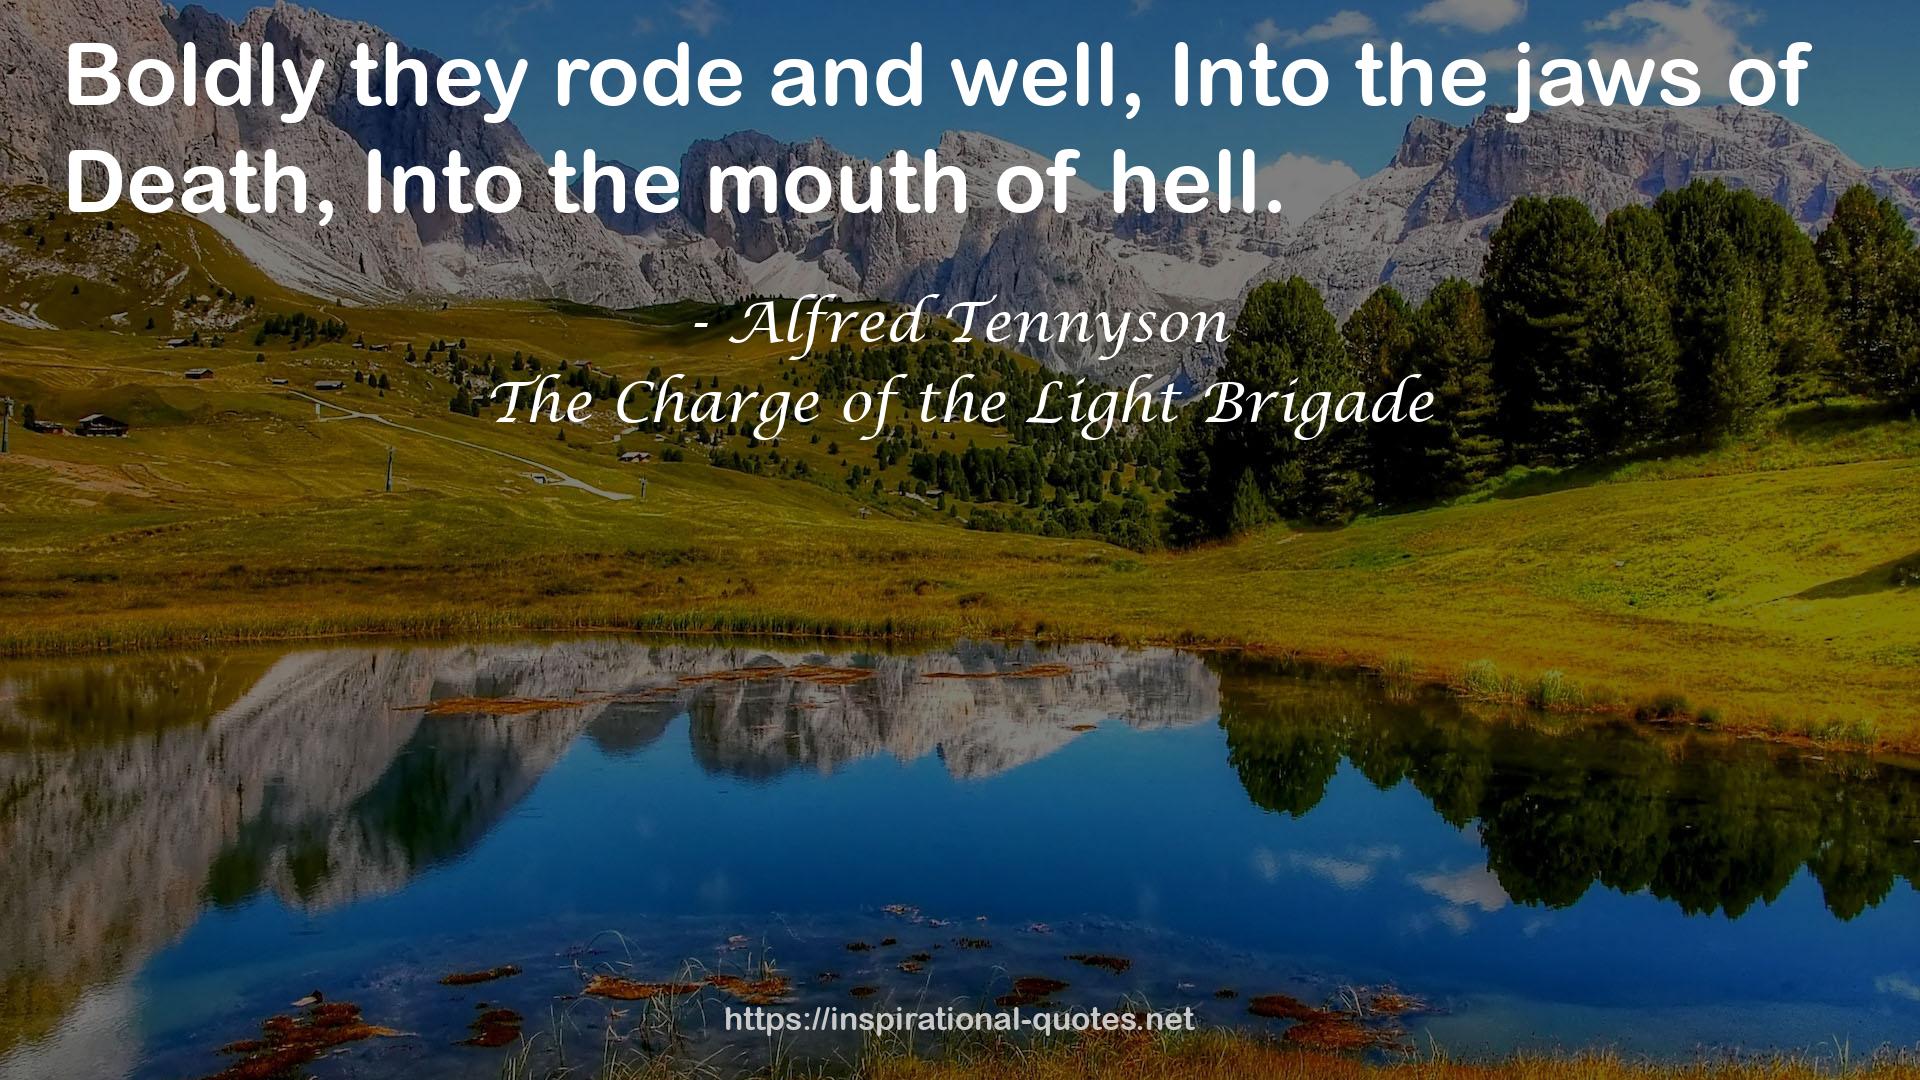 The Charge of the Light Brigade QUOTES